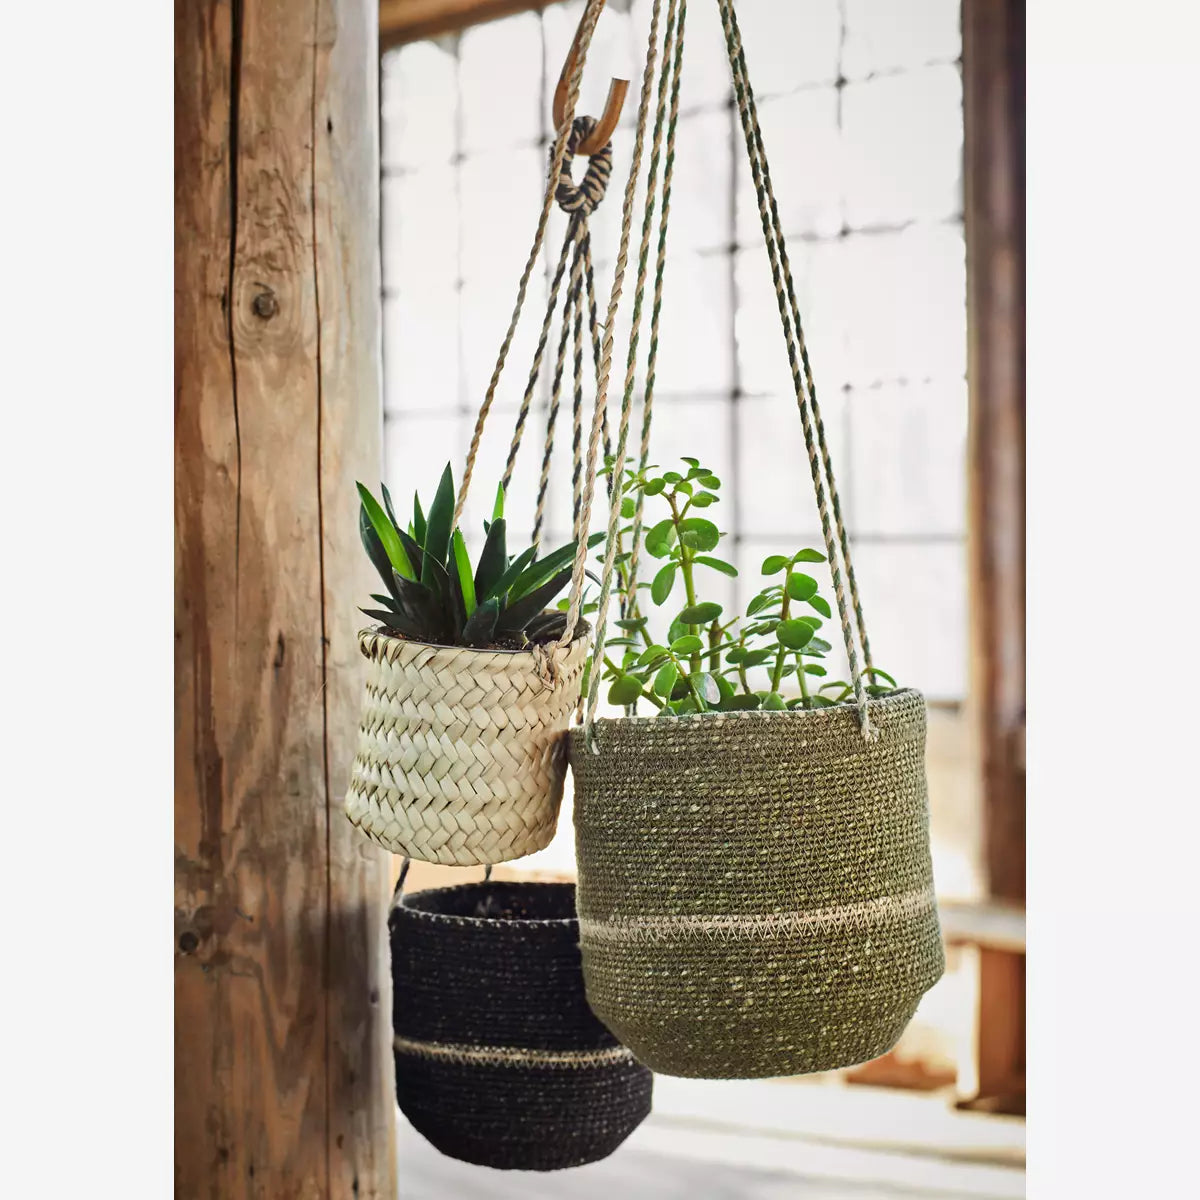 Interiors image of the straw basket with a succulent planted inside it. Alongside it are two other similar woven baskets of varying sizes. They are hung together in a window.